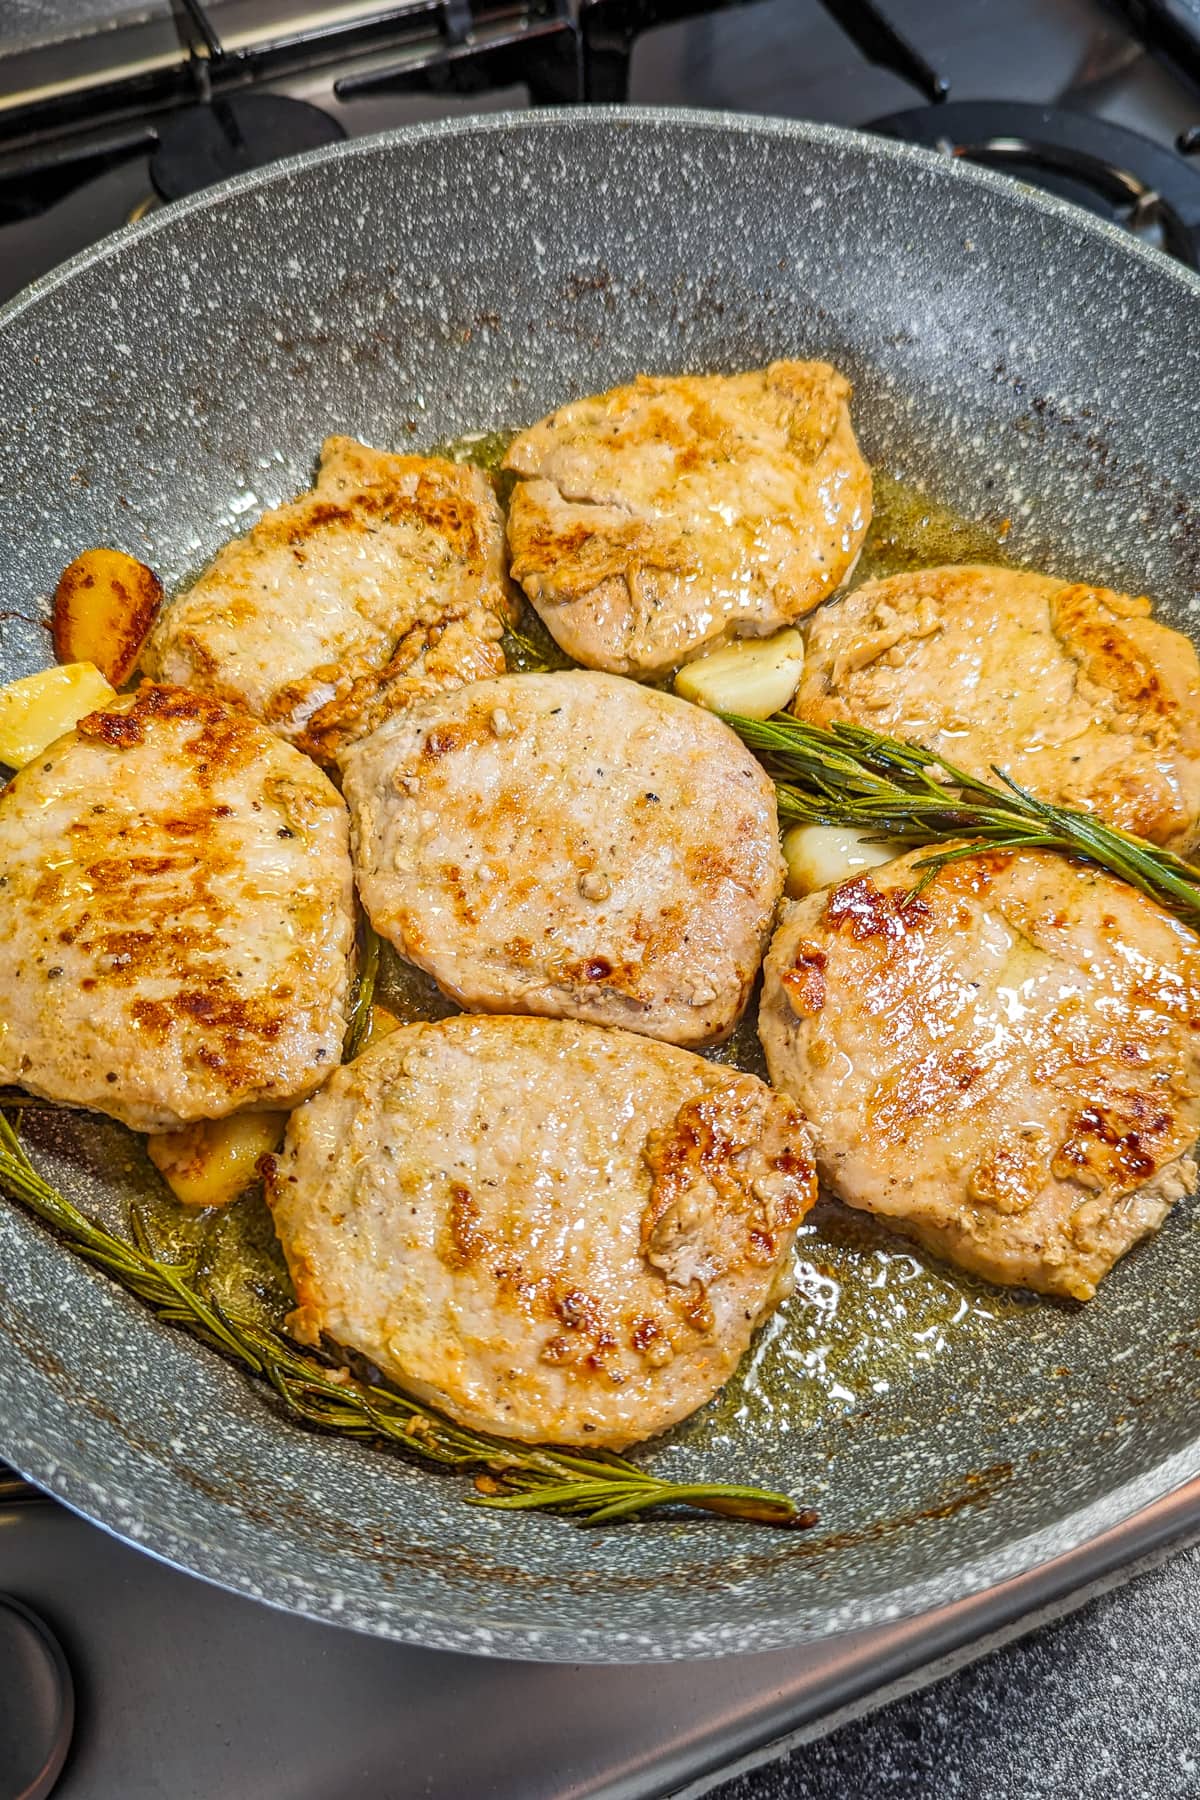 Top view of 7 pork chops in a frying pan with rosemary brunches.